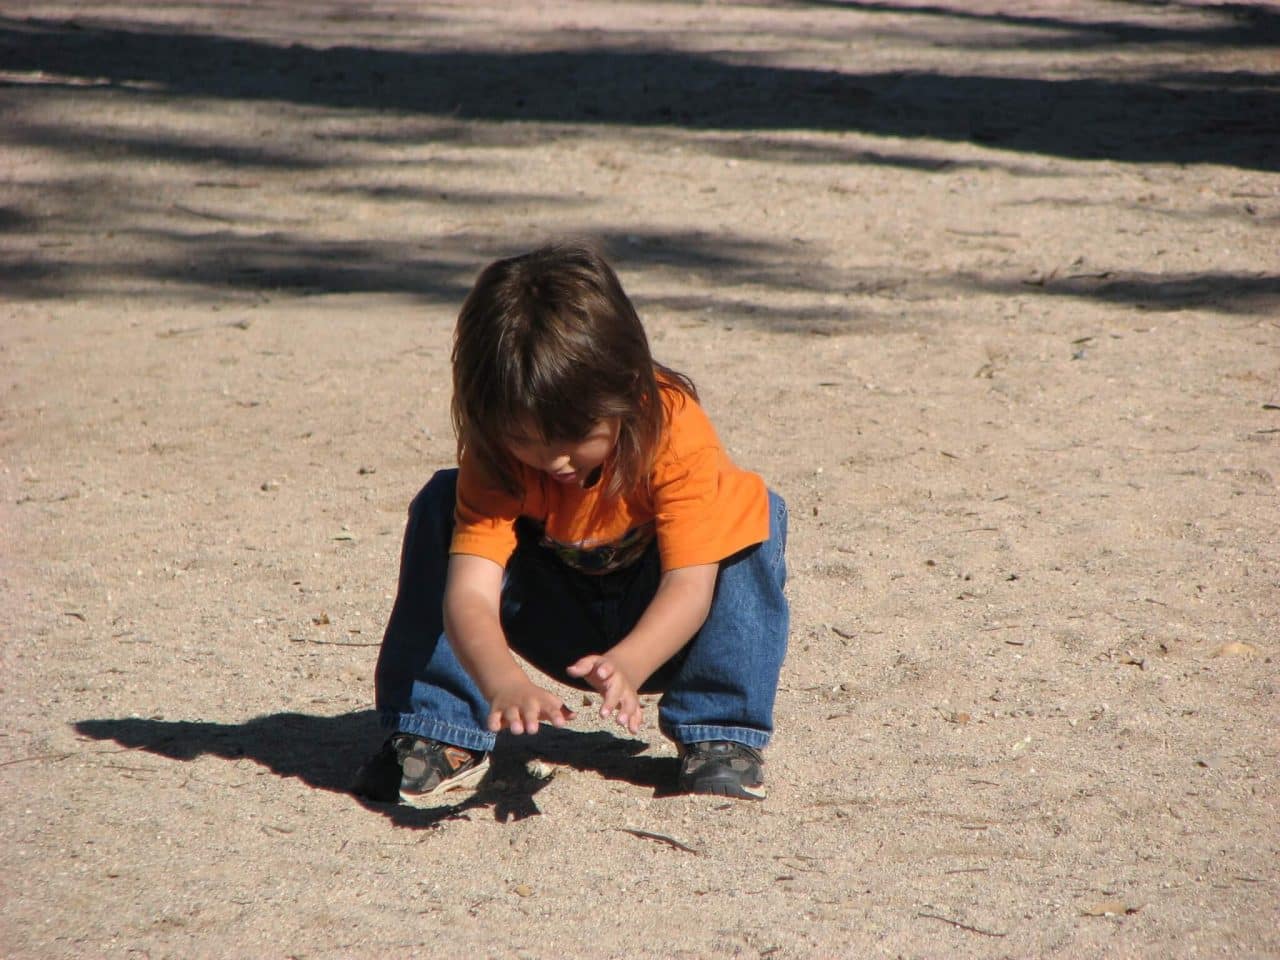 Young child in an orange shirt and jeans playing in the sand at a playground